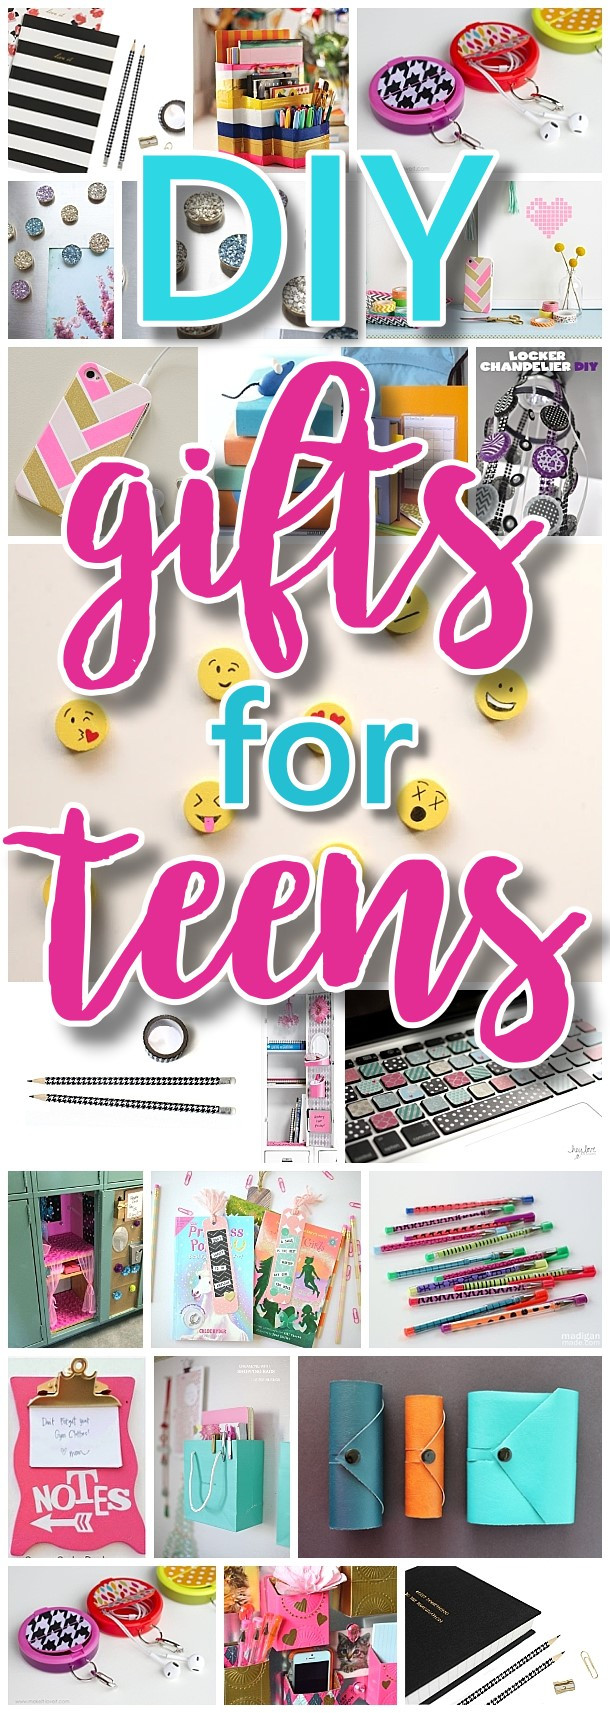 DIY Girl Birthday Gifts
 The BEST DIY Gifts for Teens Tweens and Best Friends